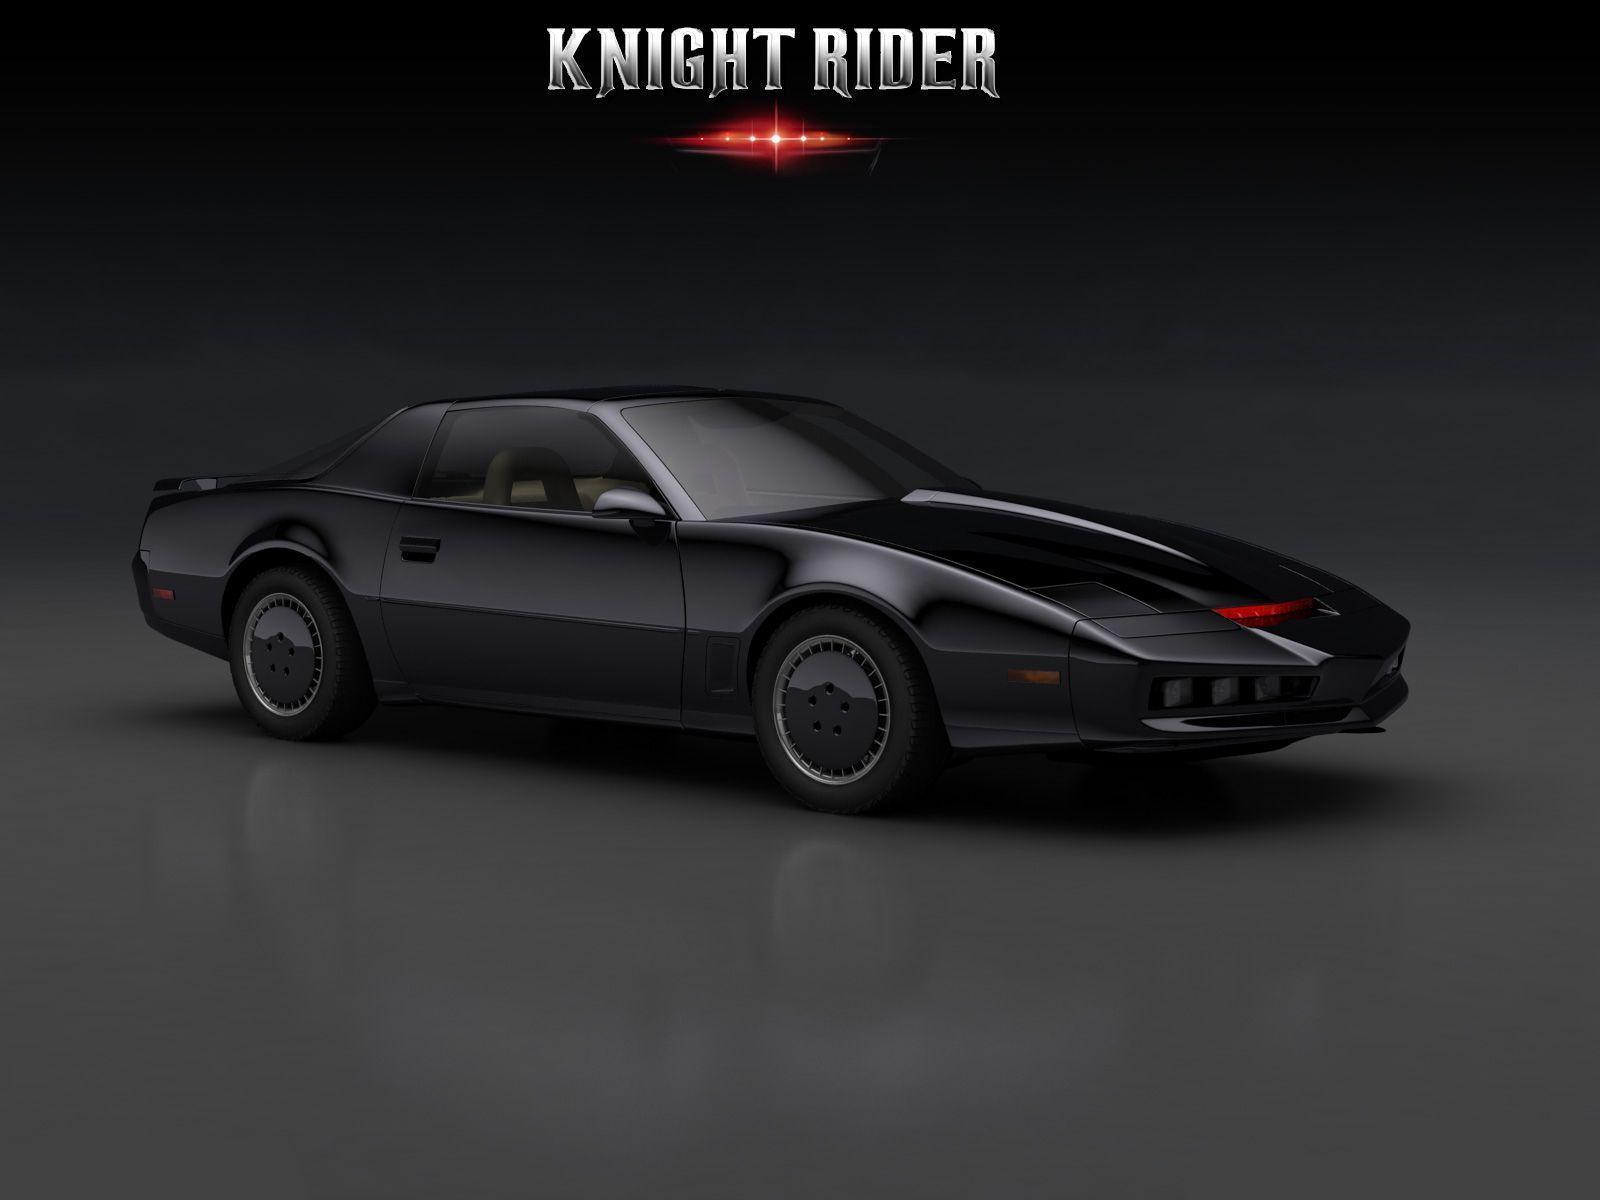 Knight Rider Live Wallpaper APK Android App  Free Download